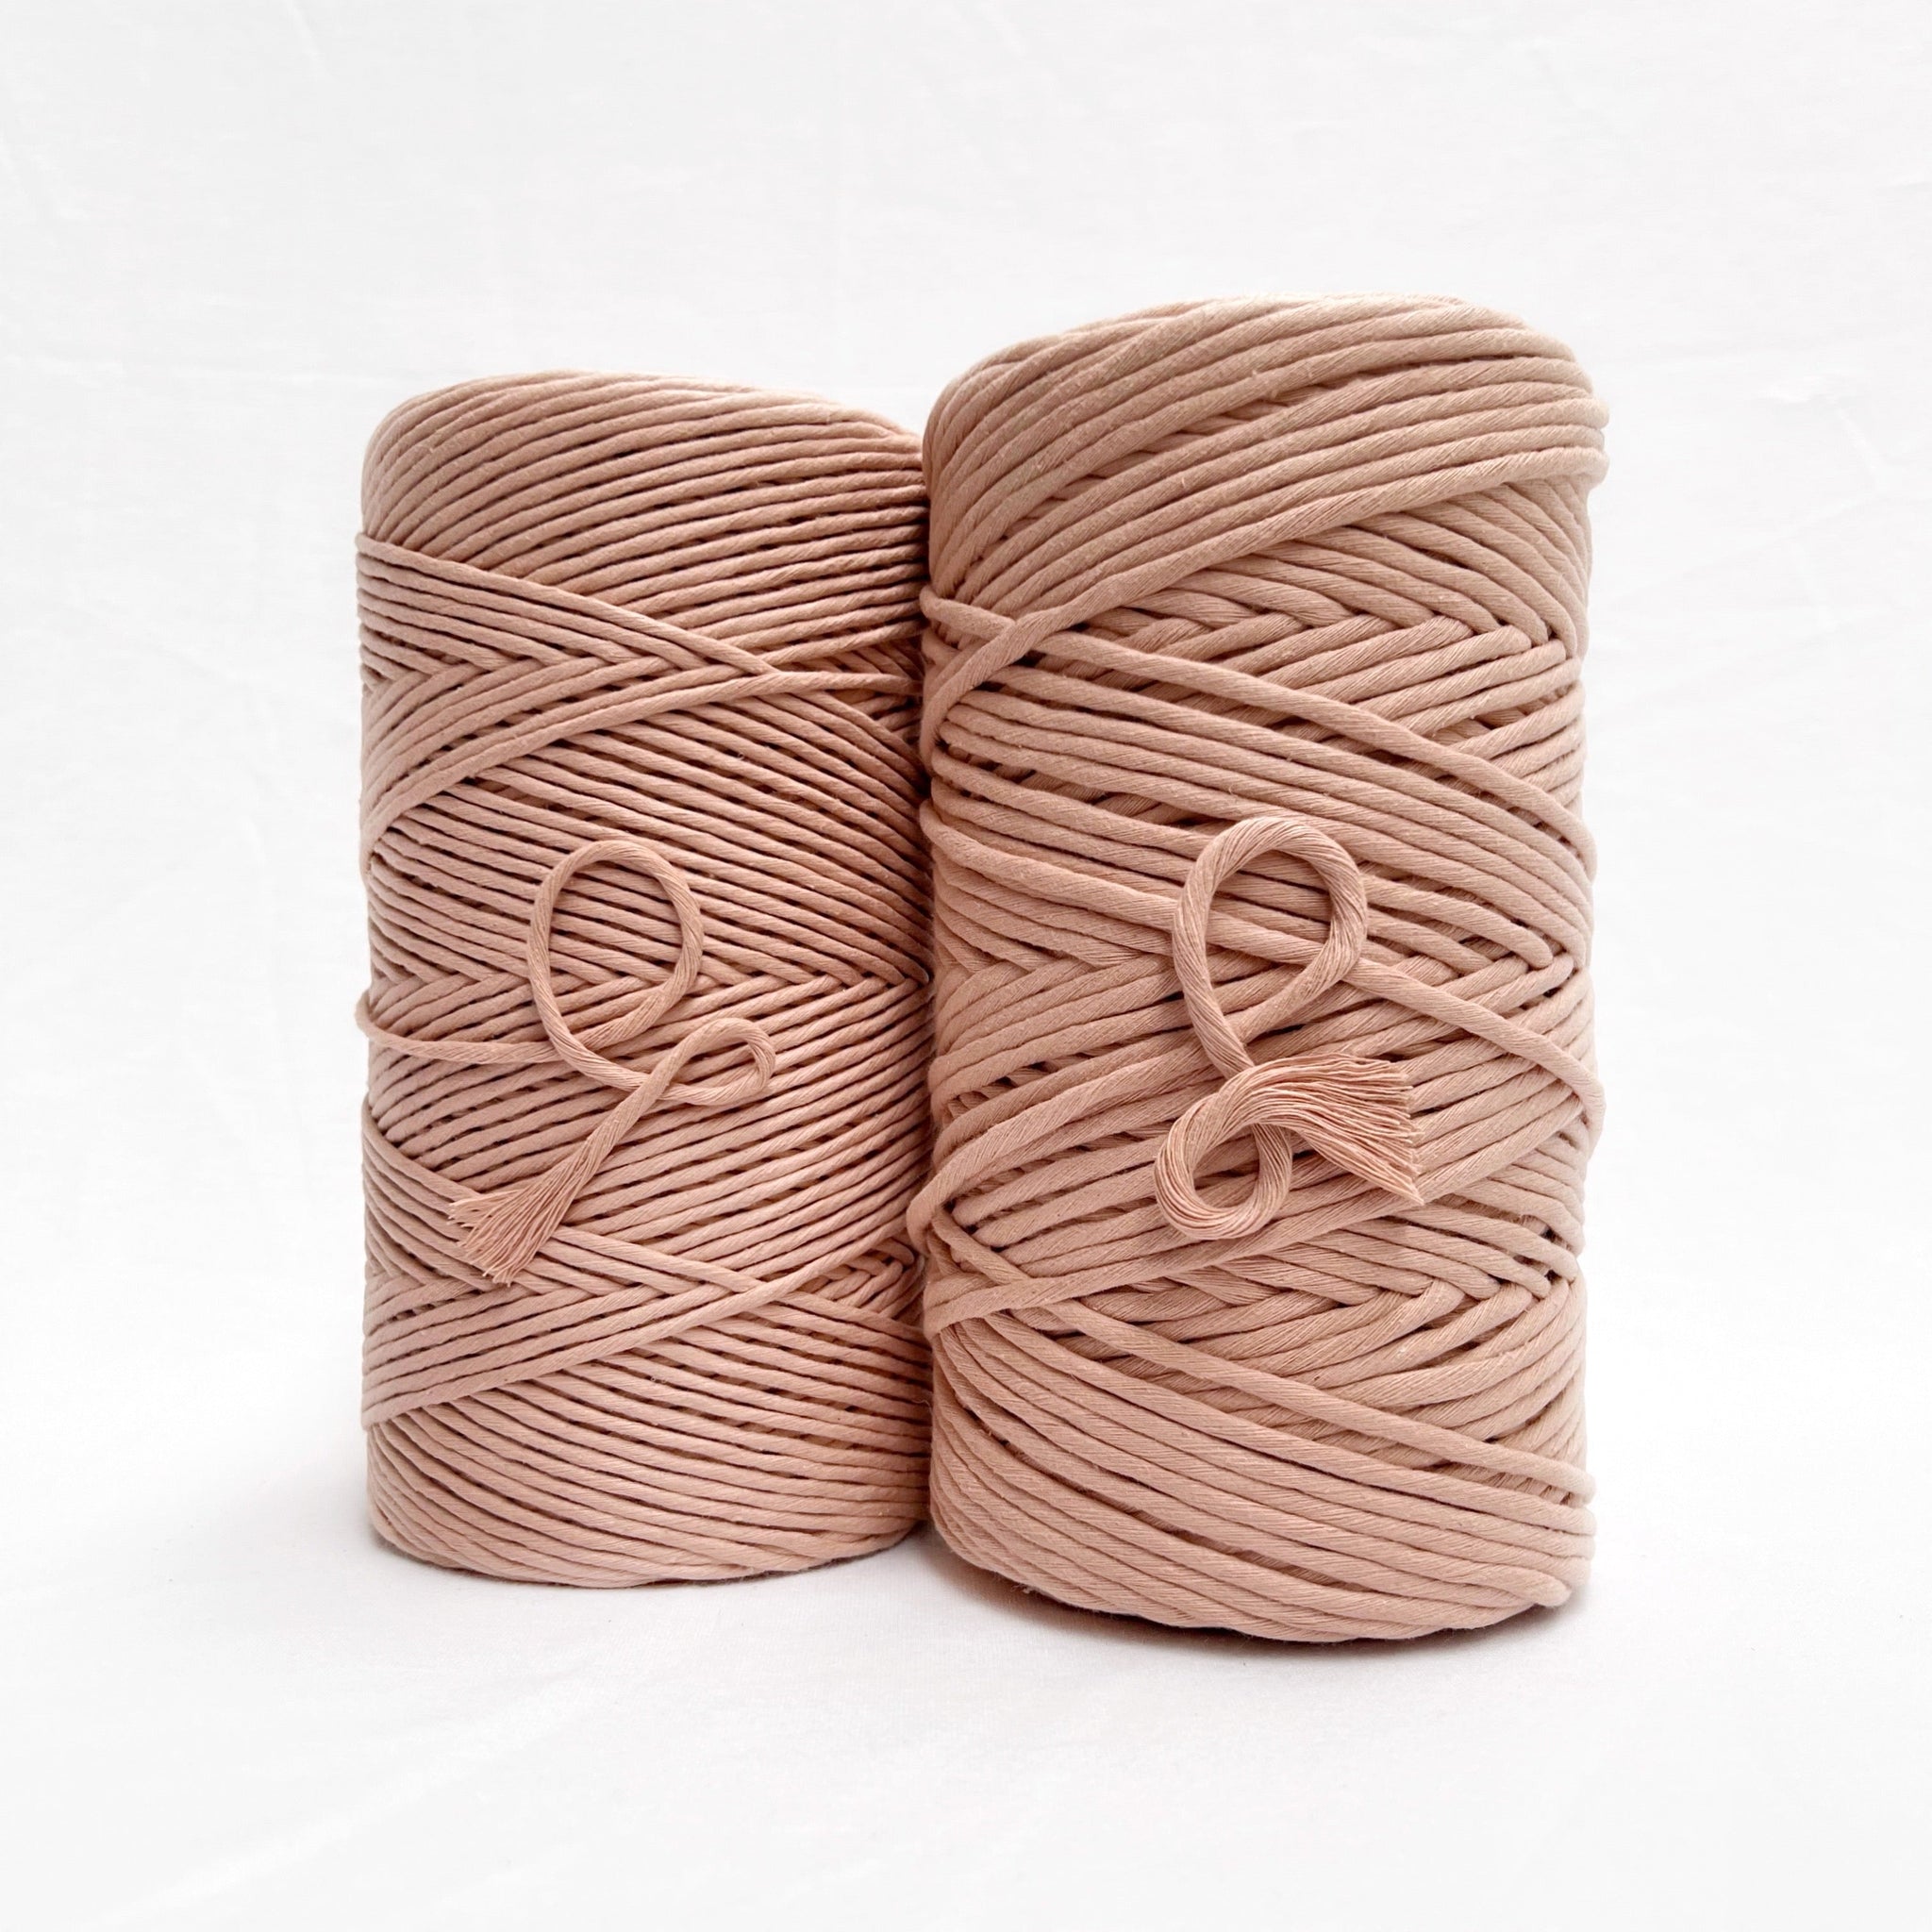 2mm - Macrame Luxe Cotton String / Wholesale Available - Mary Maker Studio  - Macrame & Weaving Supplies and Education.